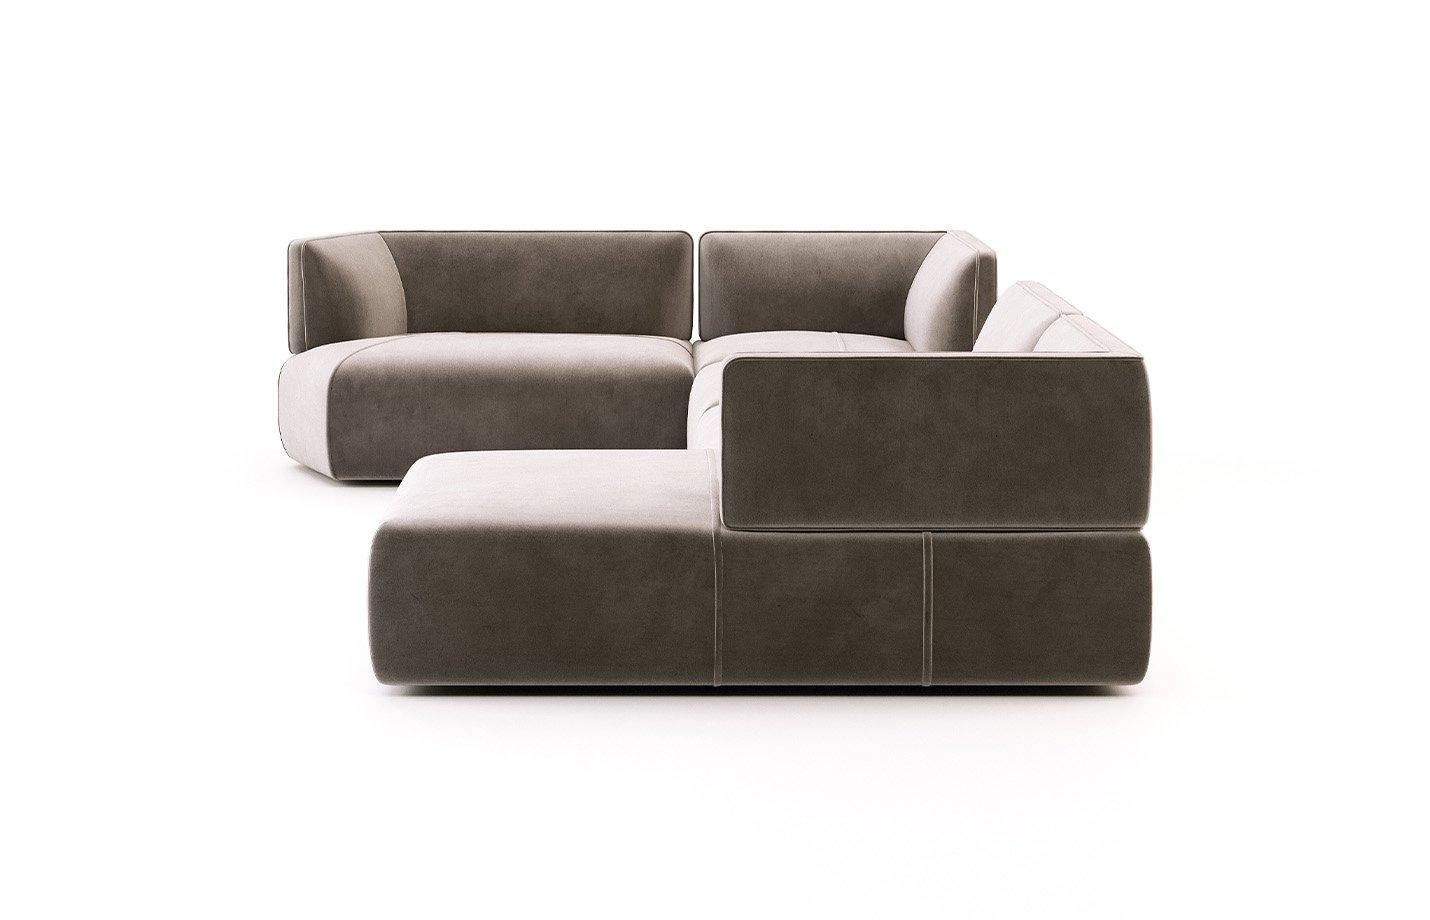 Tailor made and fully upholstered sectional sofa offered in a selection of luxurious, velvet fabrics.
Shown with elephant cotton velvet. All hardwood frame with advanced comfort spring suspension. The seat and back cushions filled with premium